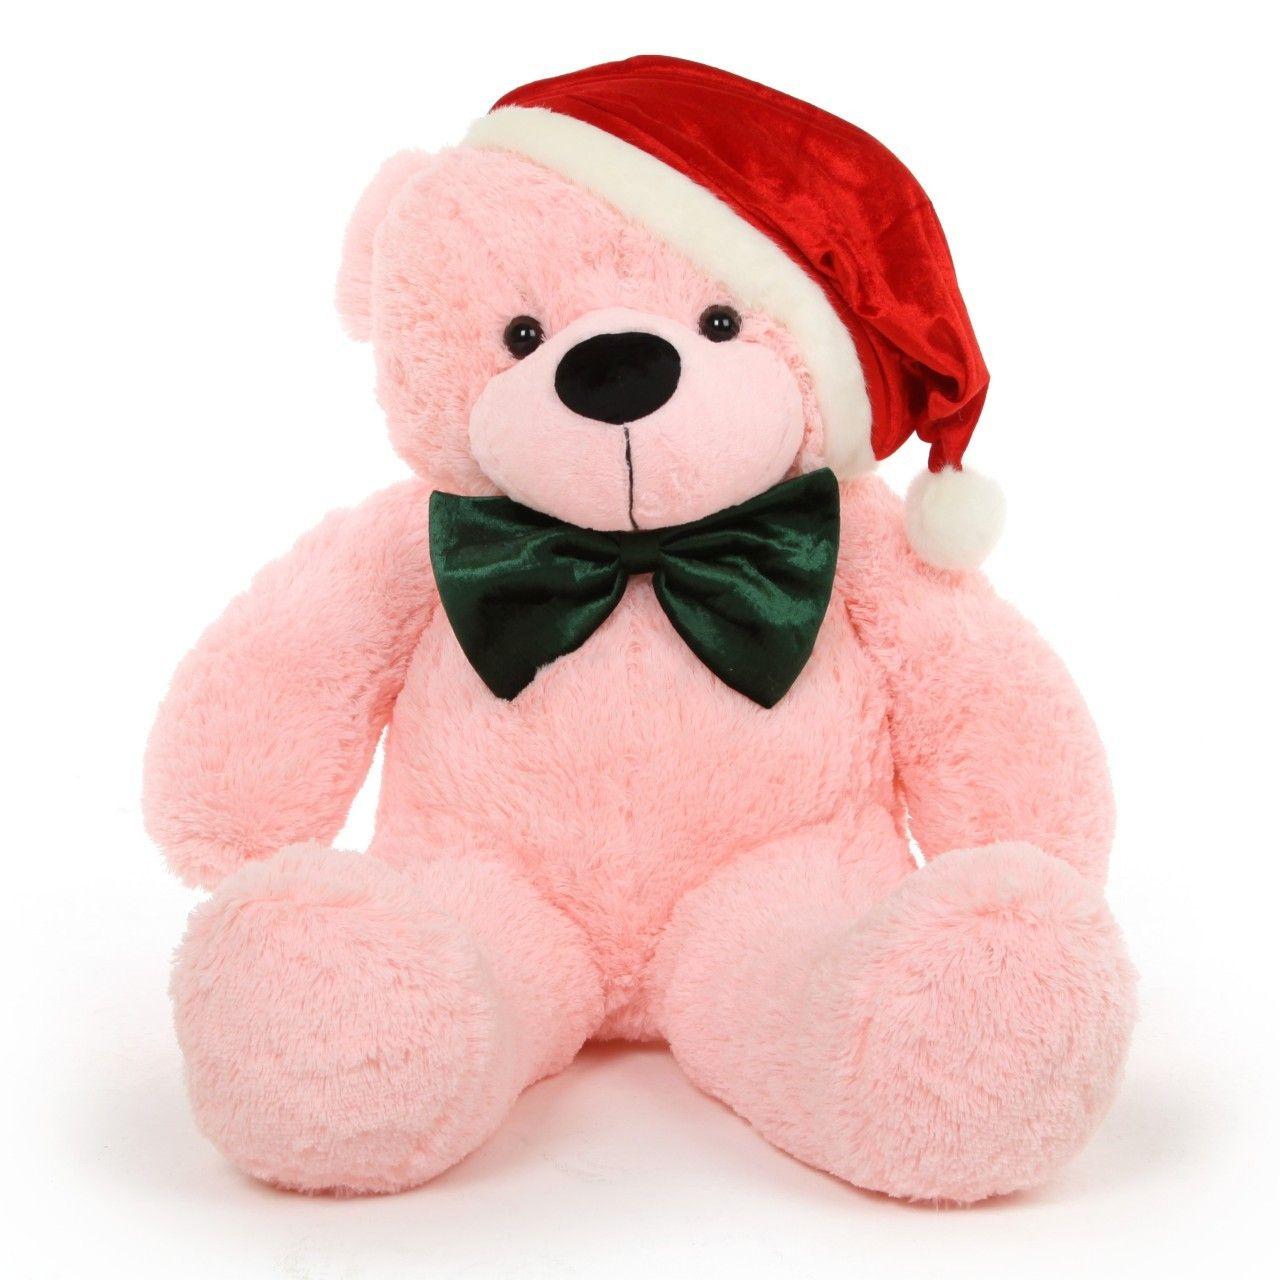 Pink Teddy Bear Stock Photos, Images and Backgrounds for Free Download